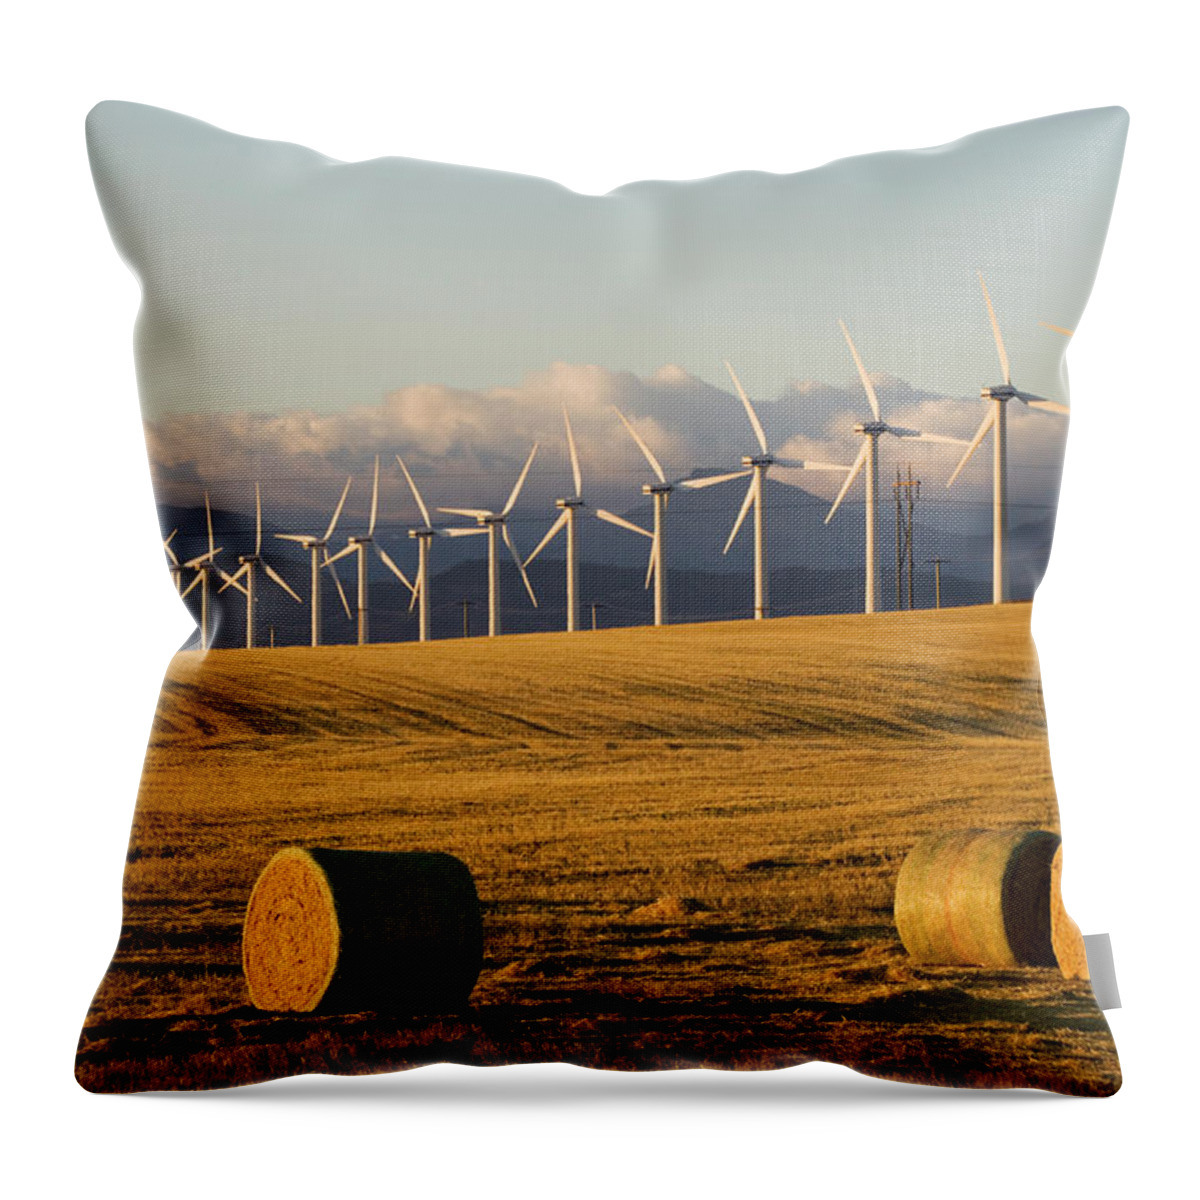 Air Throw Pillow featuring the photograph Windmills Used For Power Generation #1 by Henry Georgi